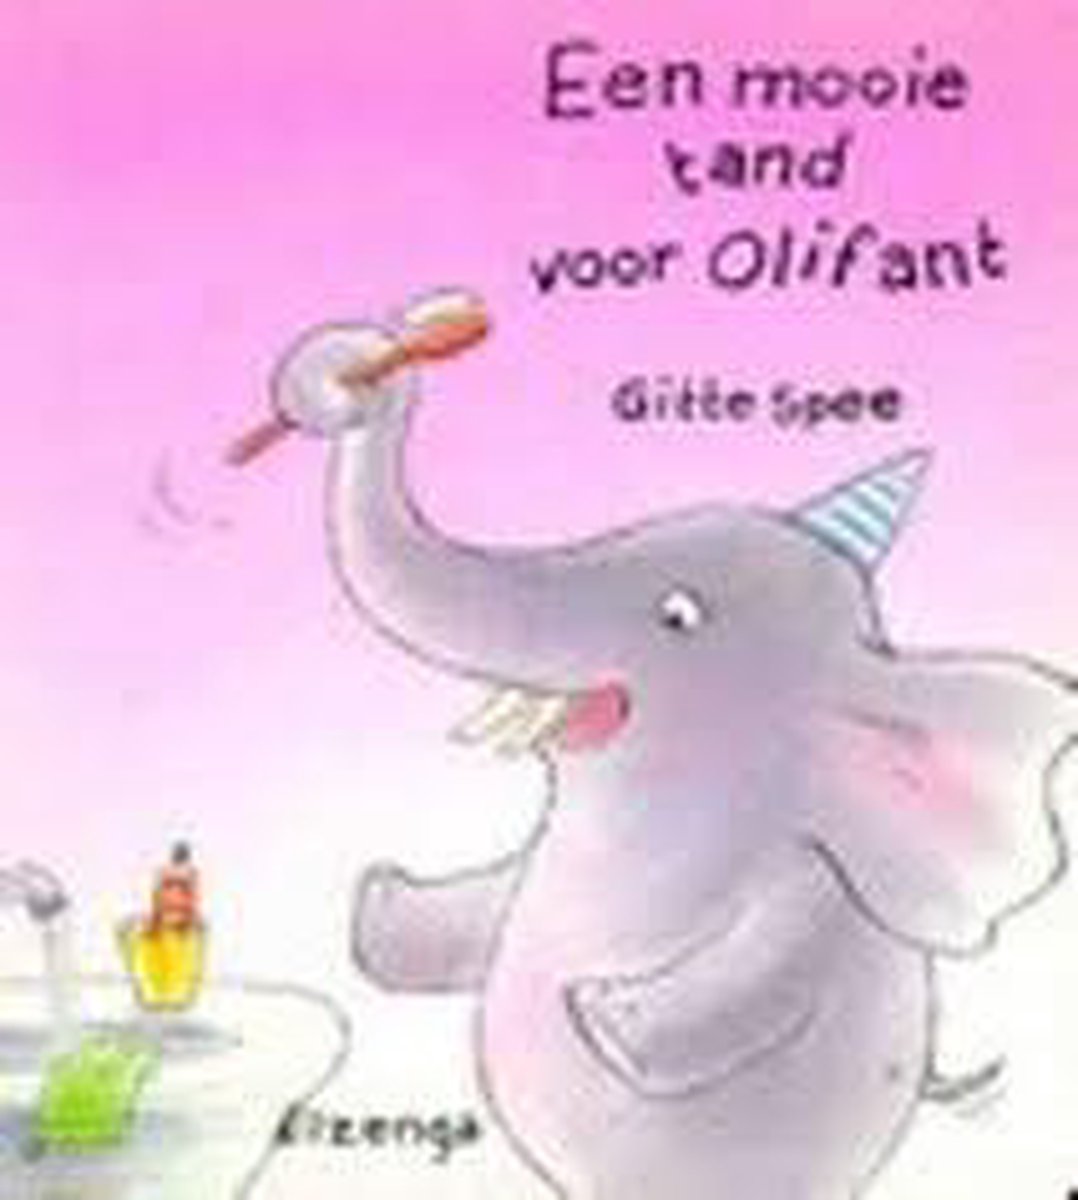 Mooie tand voor olifant